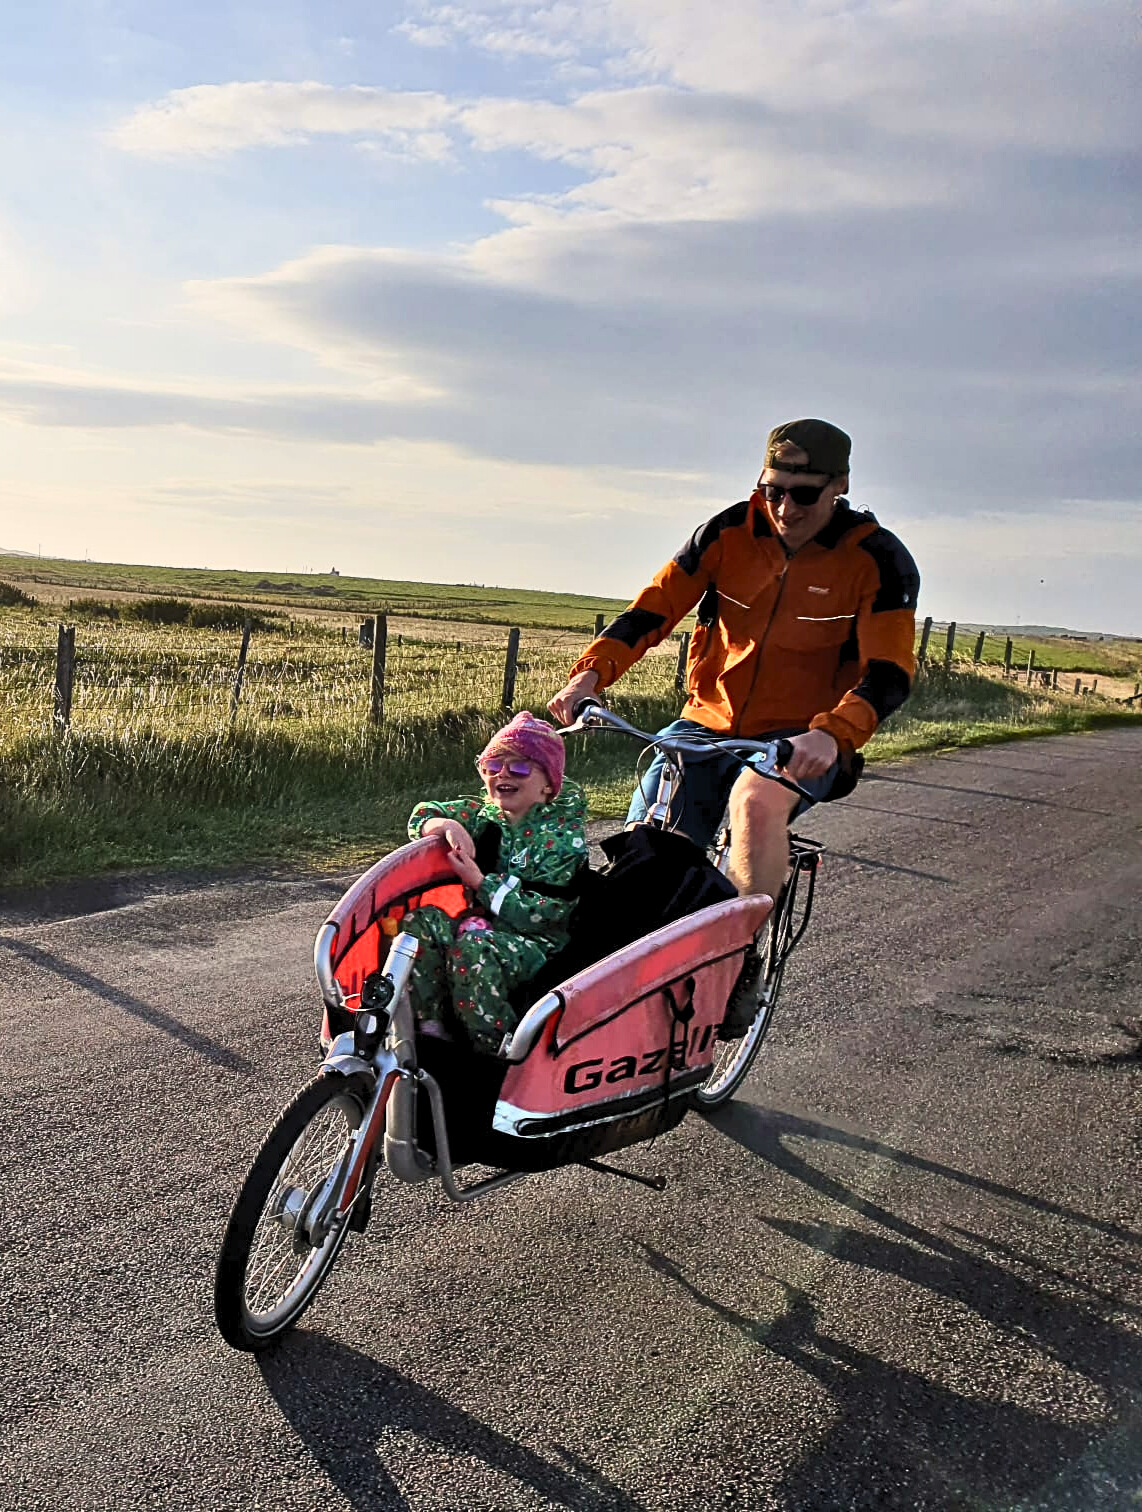 A man cycles a cargo bike with compartment at the front. A child is sitting in the front, smiling. The sun is shining.